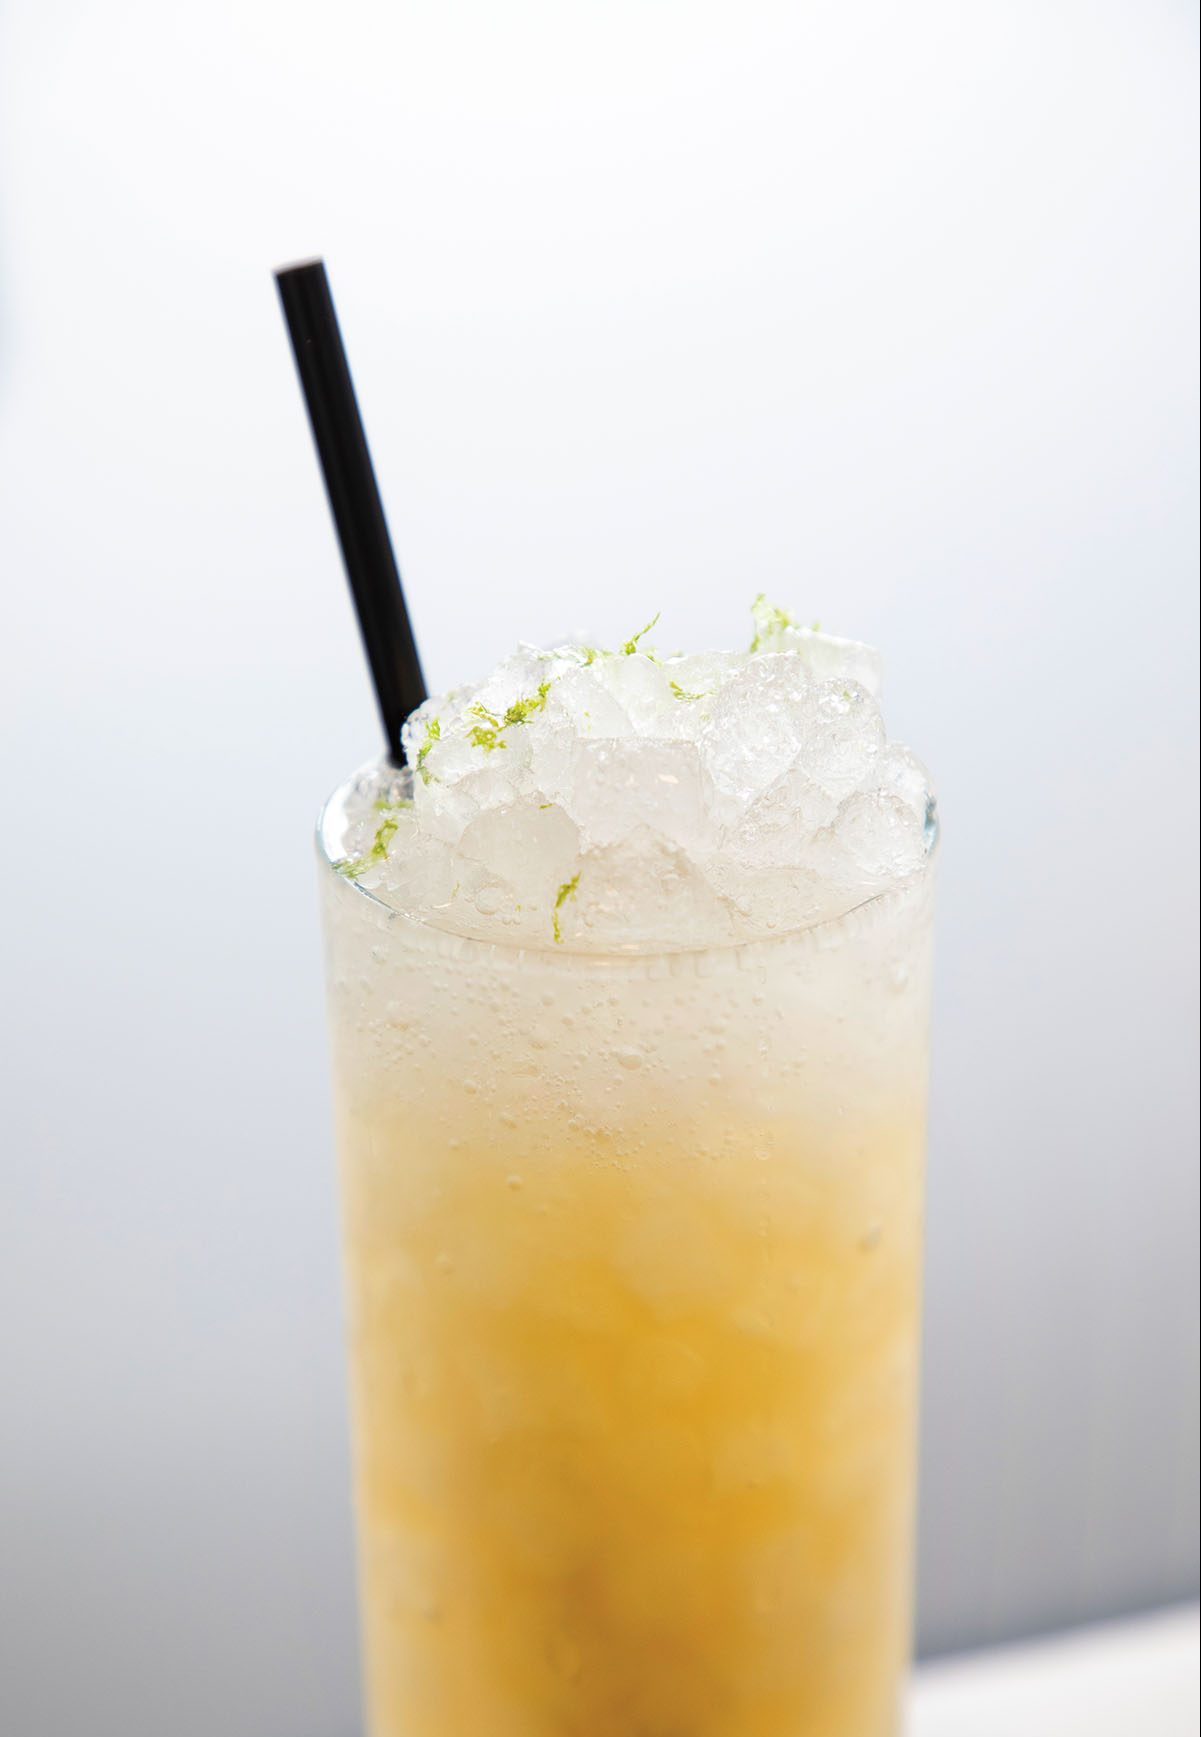 A golden-colored cocktail in a tall glass with ice, lime garnish and a black straw